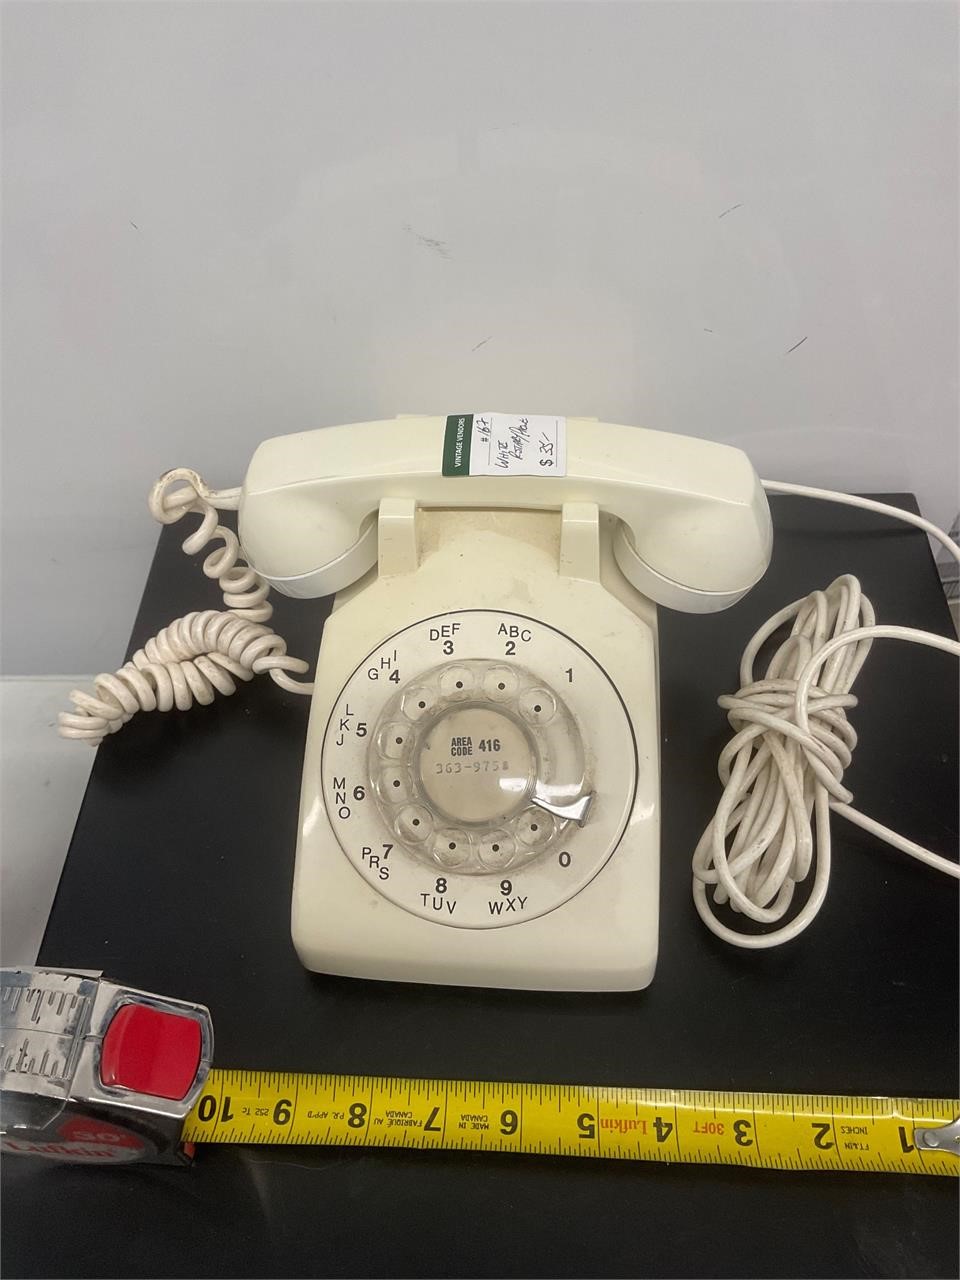 Northern electric made in Canada phone